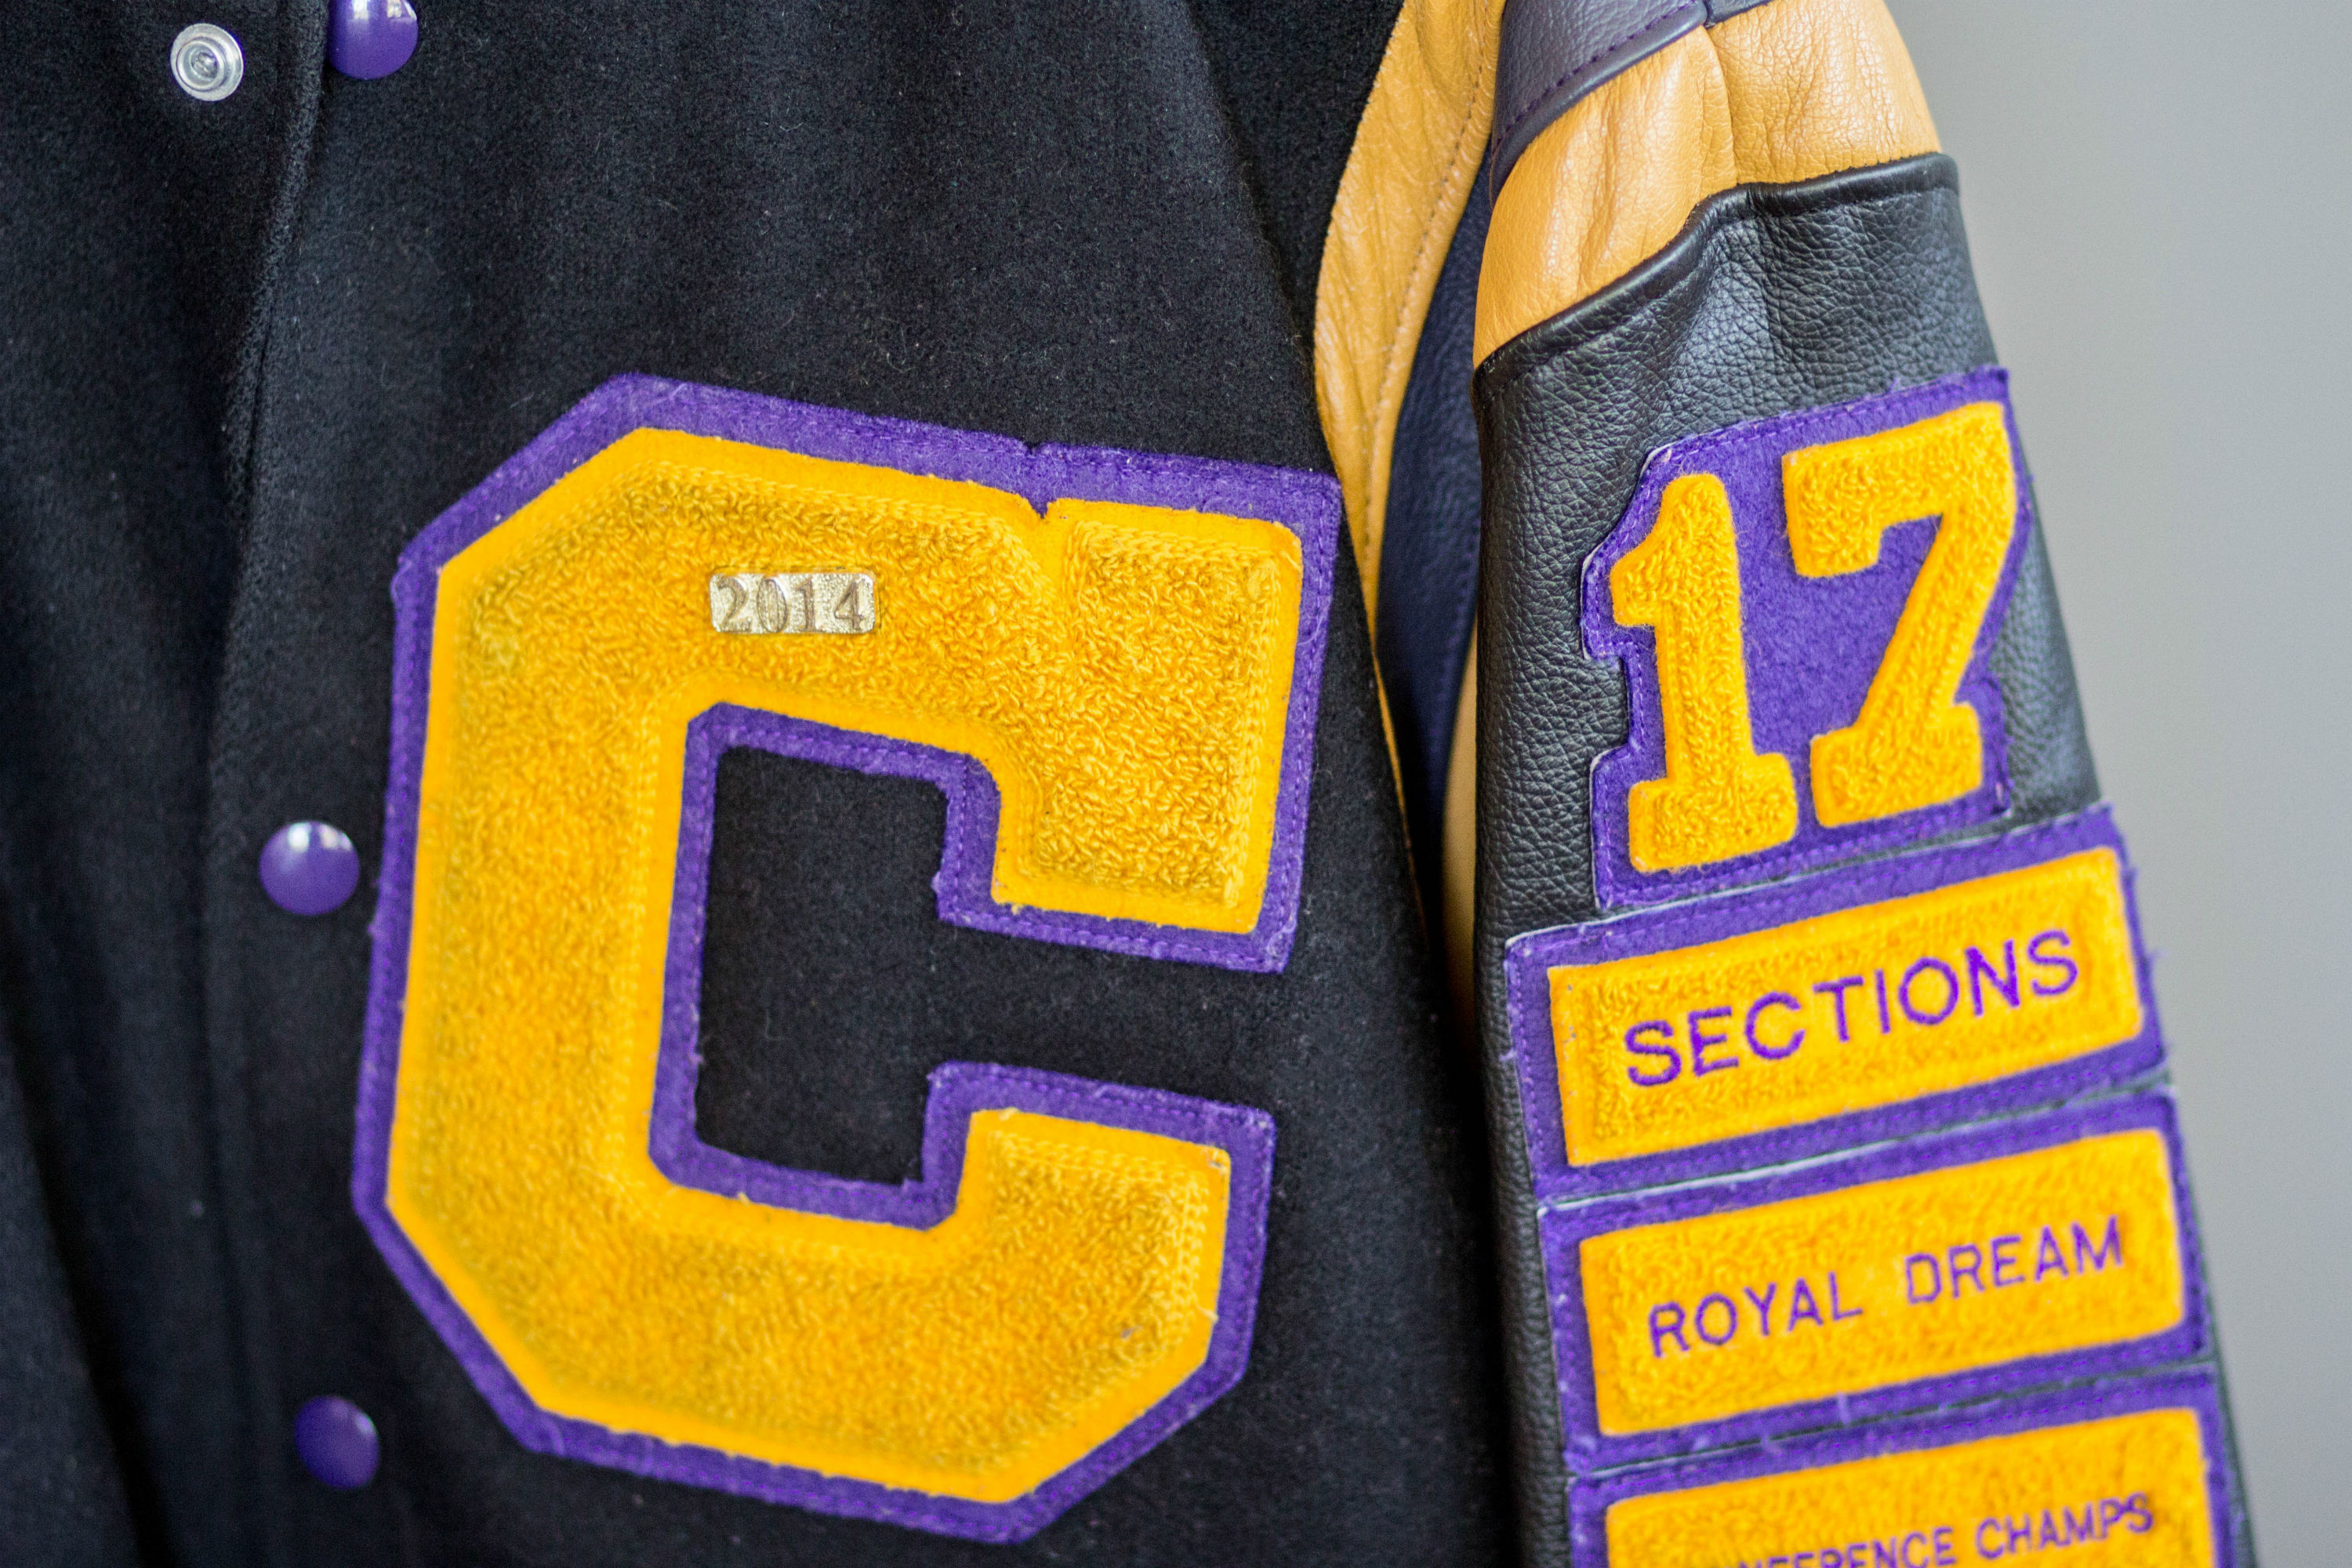 A high school letter jacket is used as decor for a sports banquet at Hazeltine National Golf Club